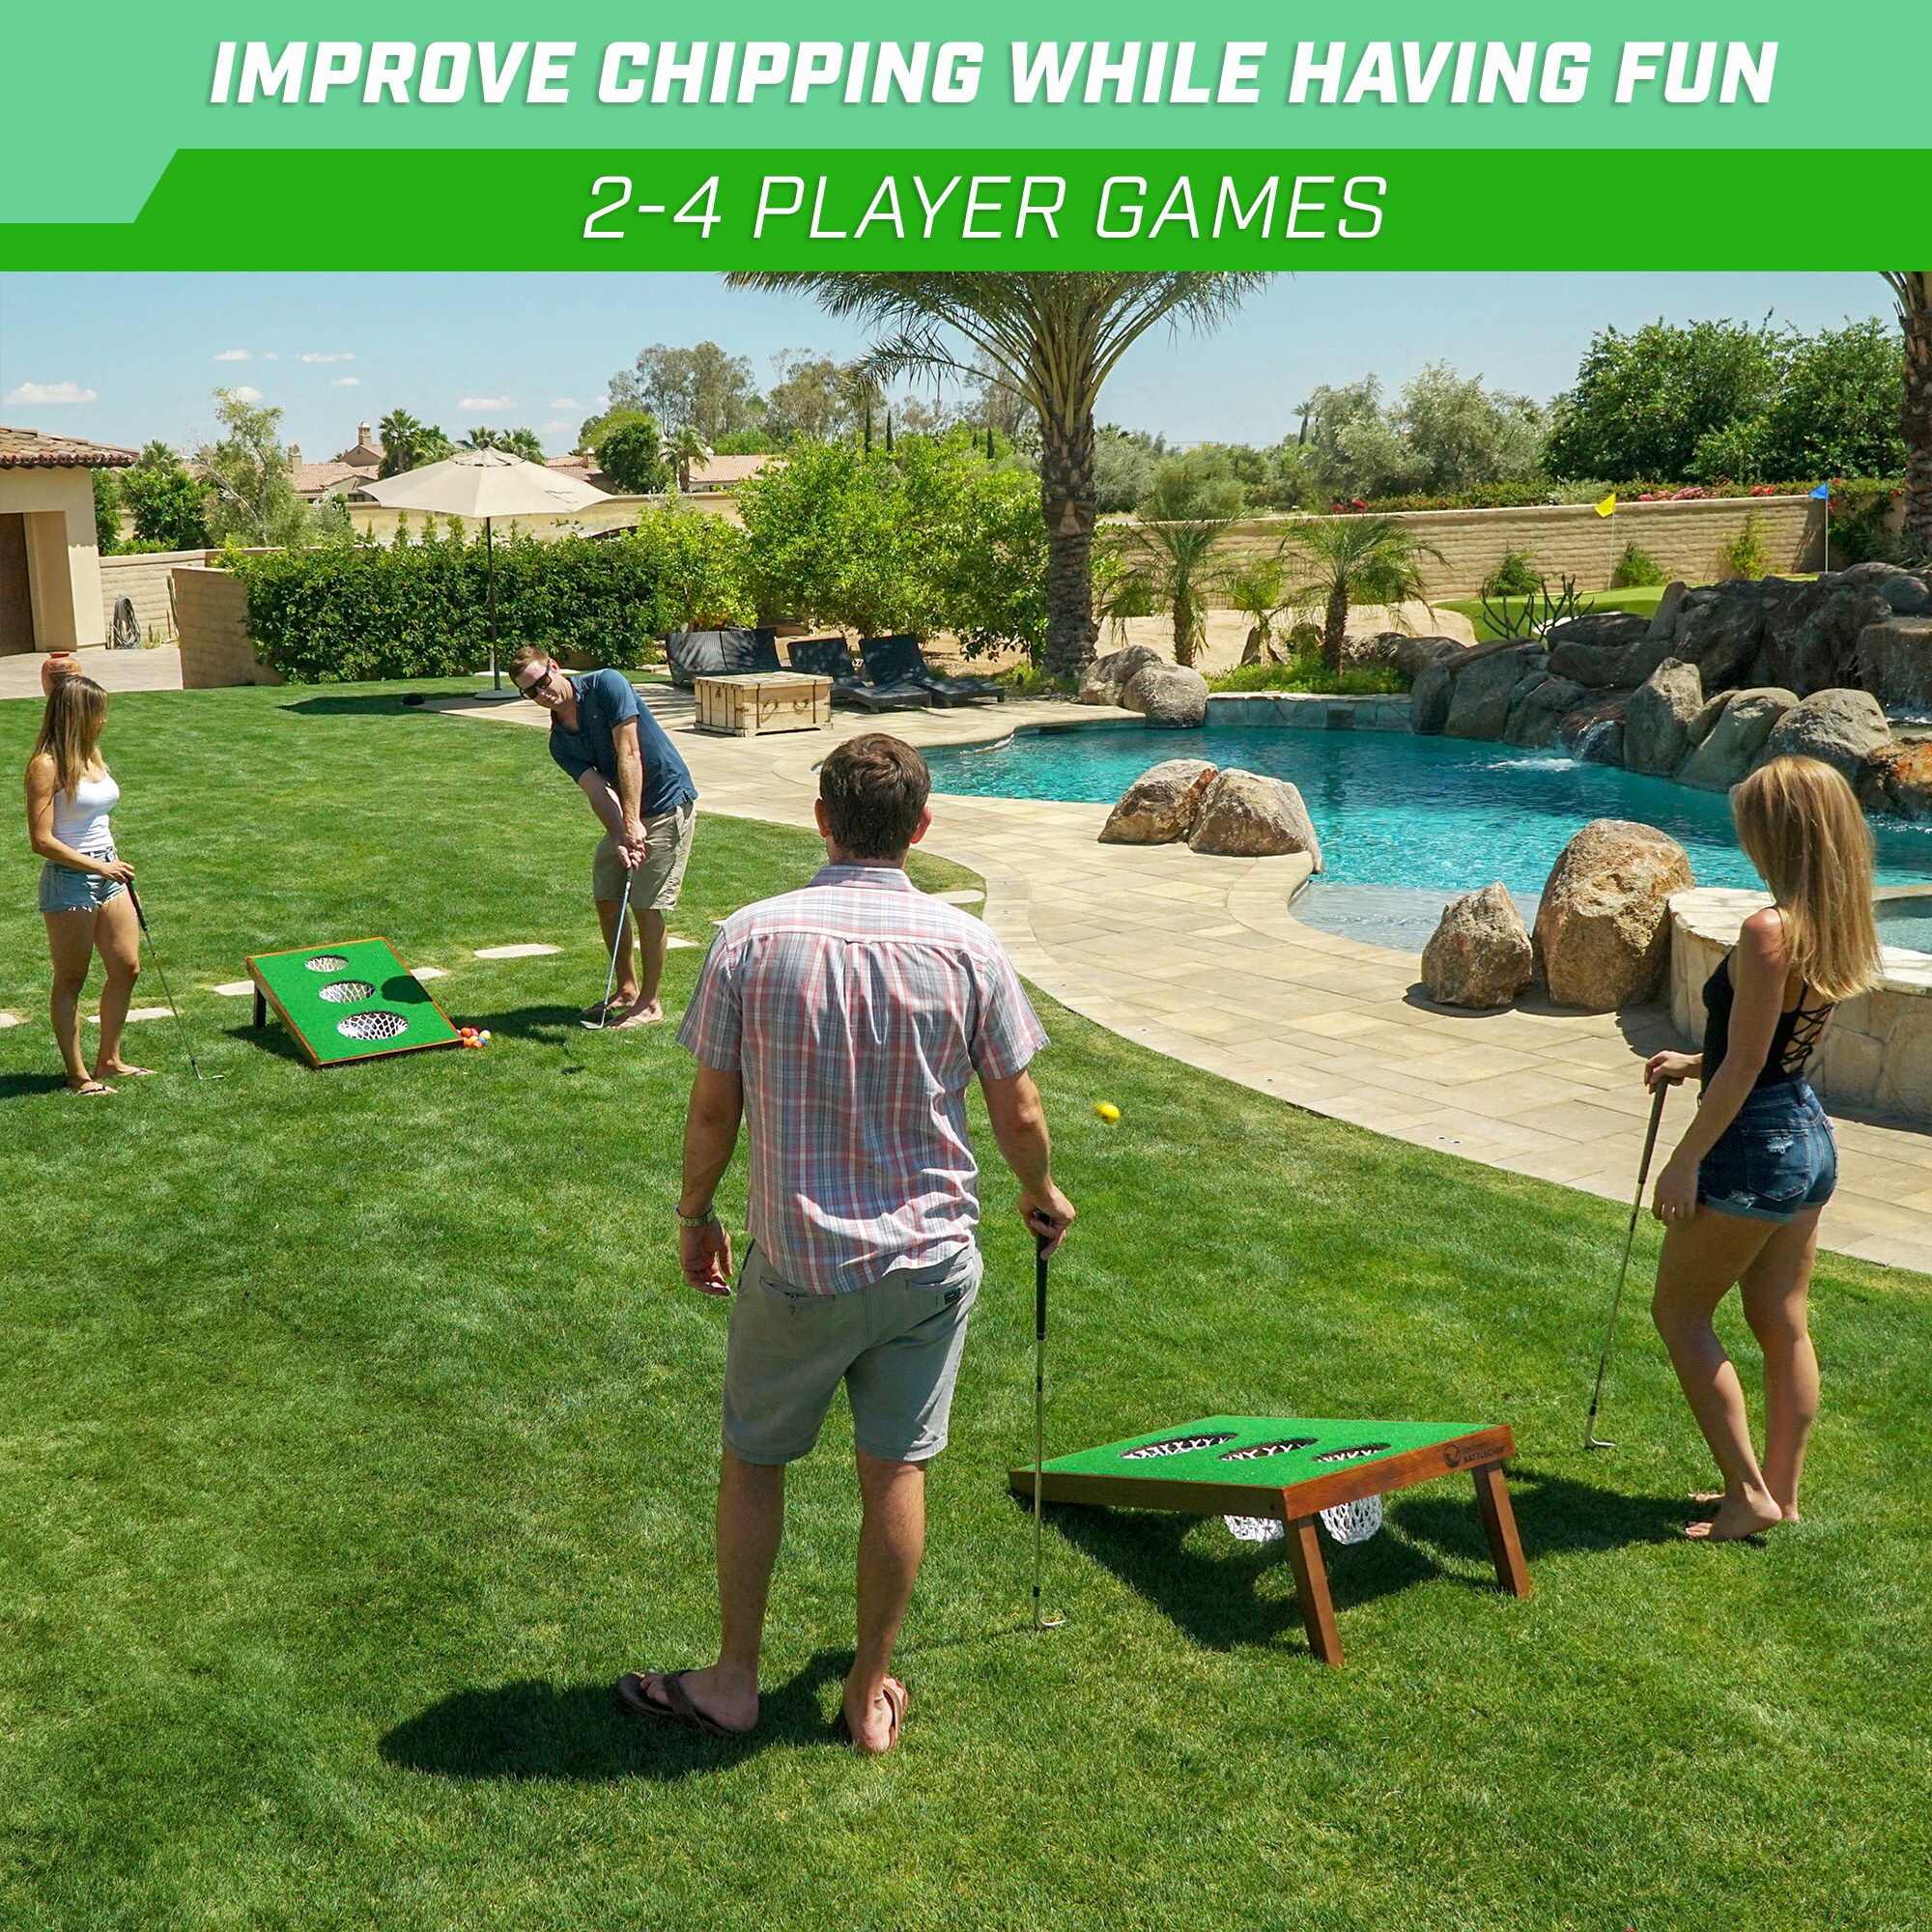 GoSports Golf Simulator - BATTLECHIP: Golf and Cornhole Hybrid Game -  Premium Construction - Tournament Play - Adult Unisex in the Golf Gear &  Accessories department at